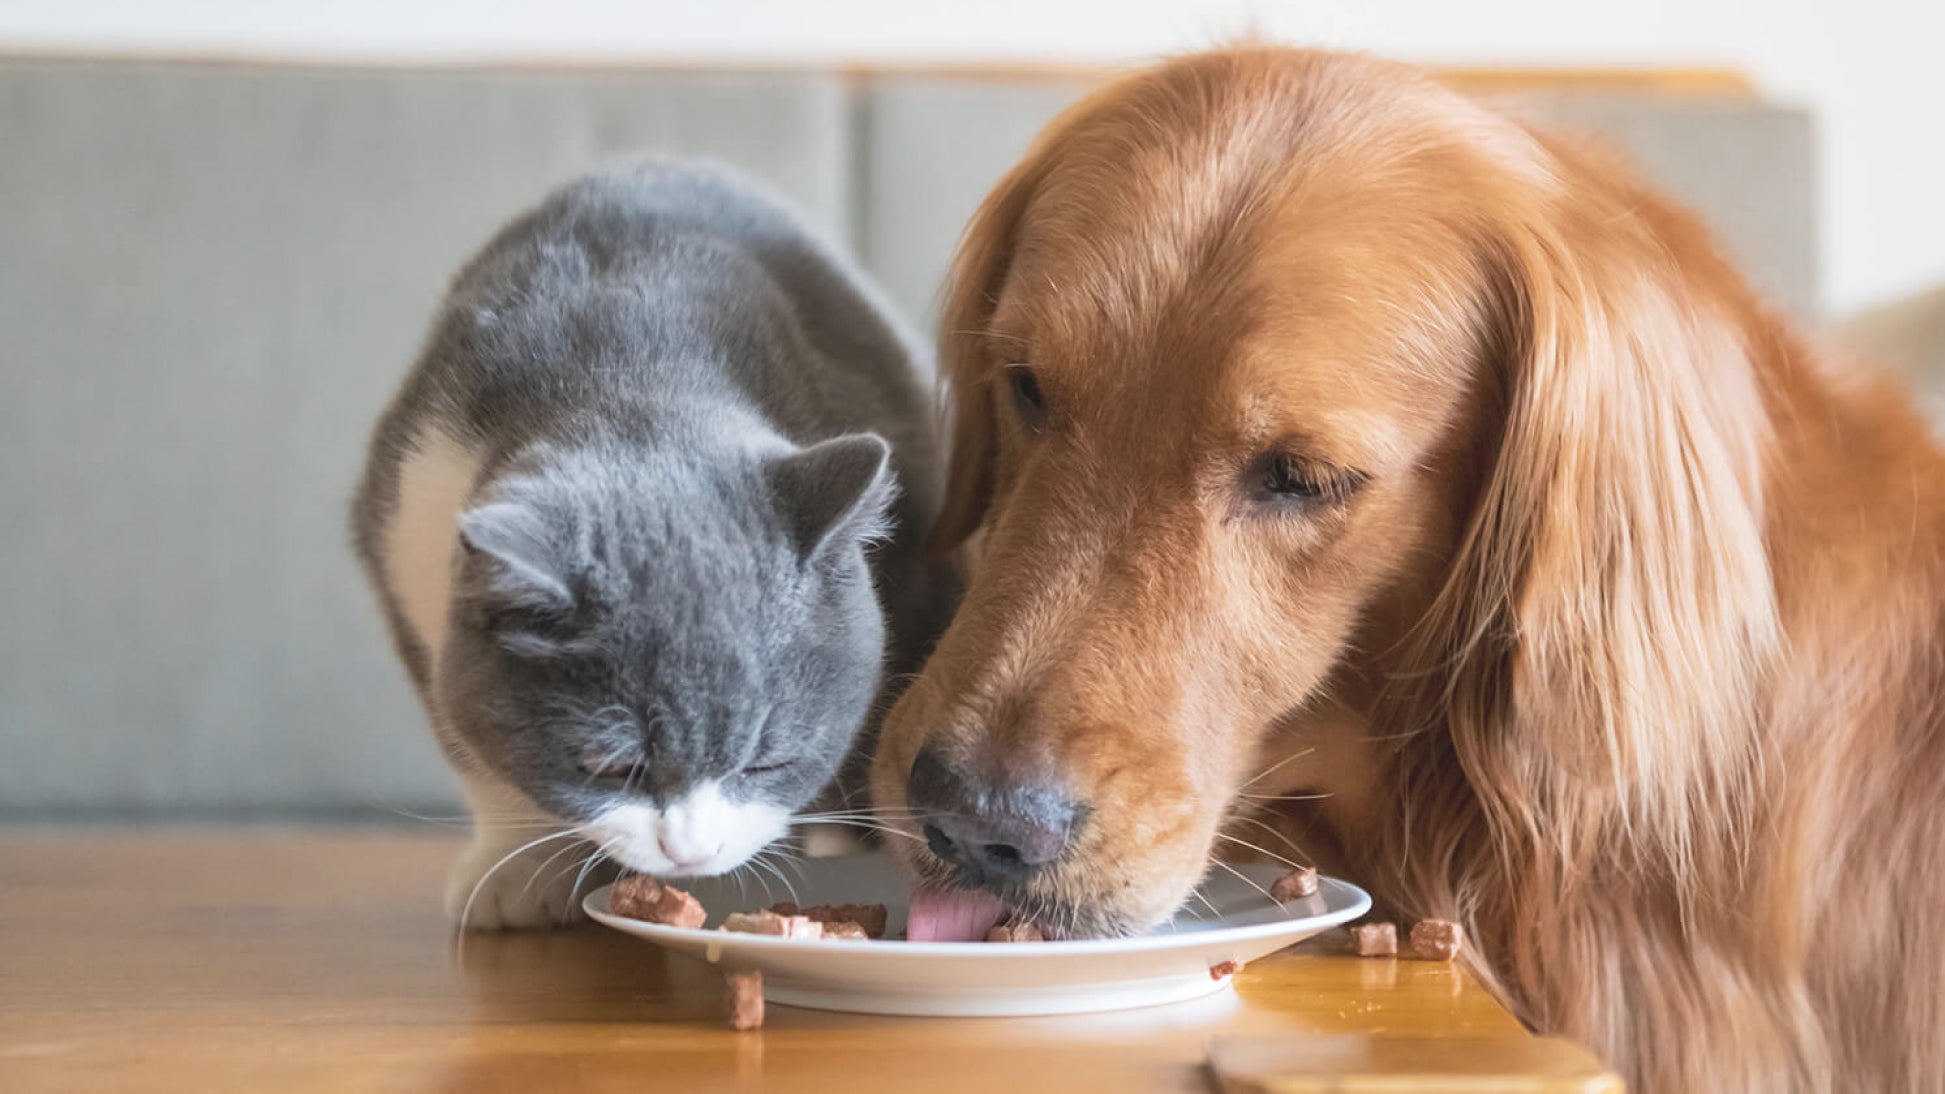 A dog and cat eating off a plate